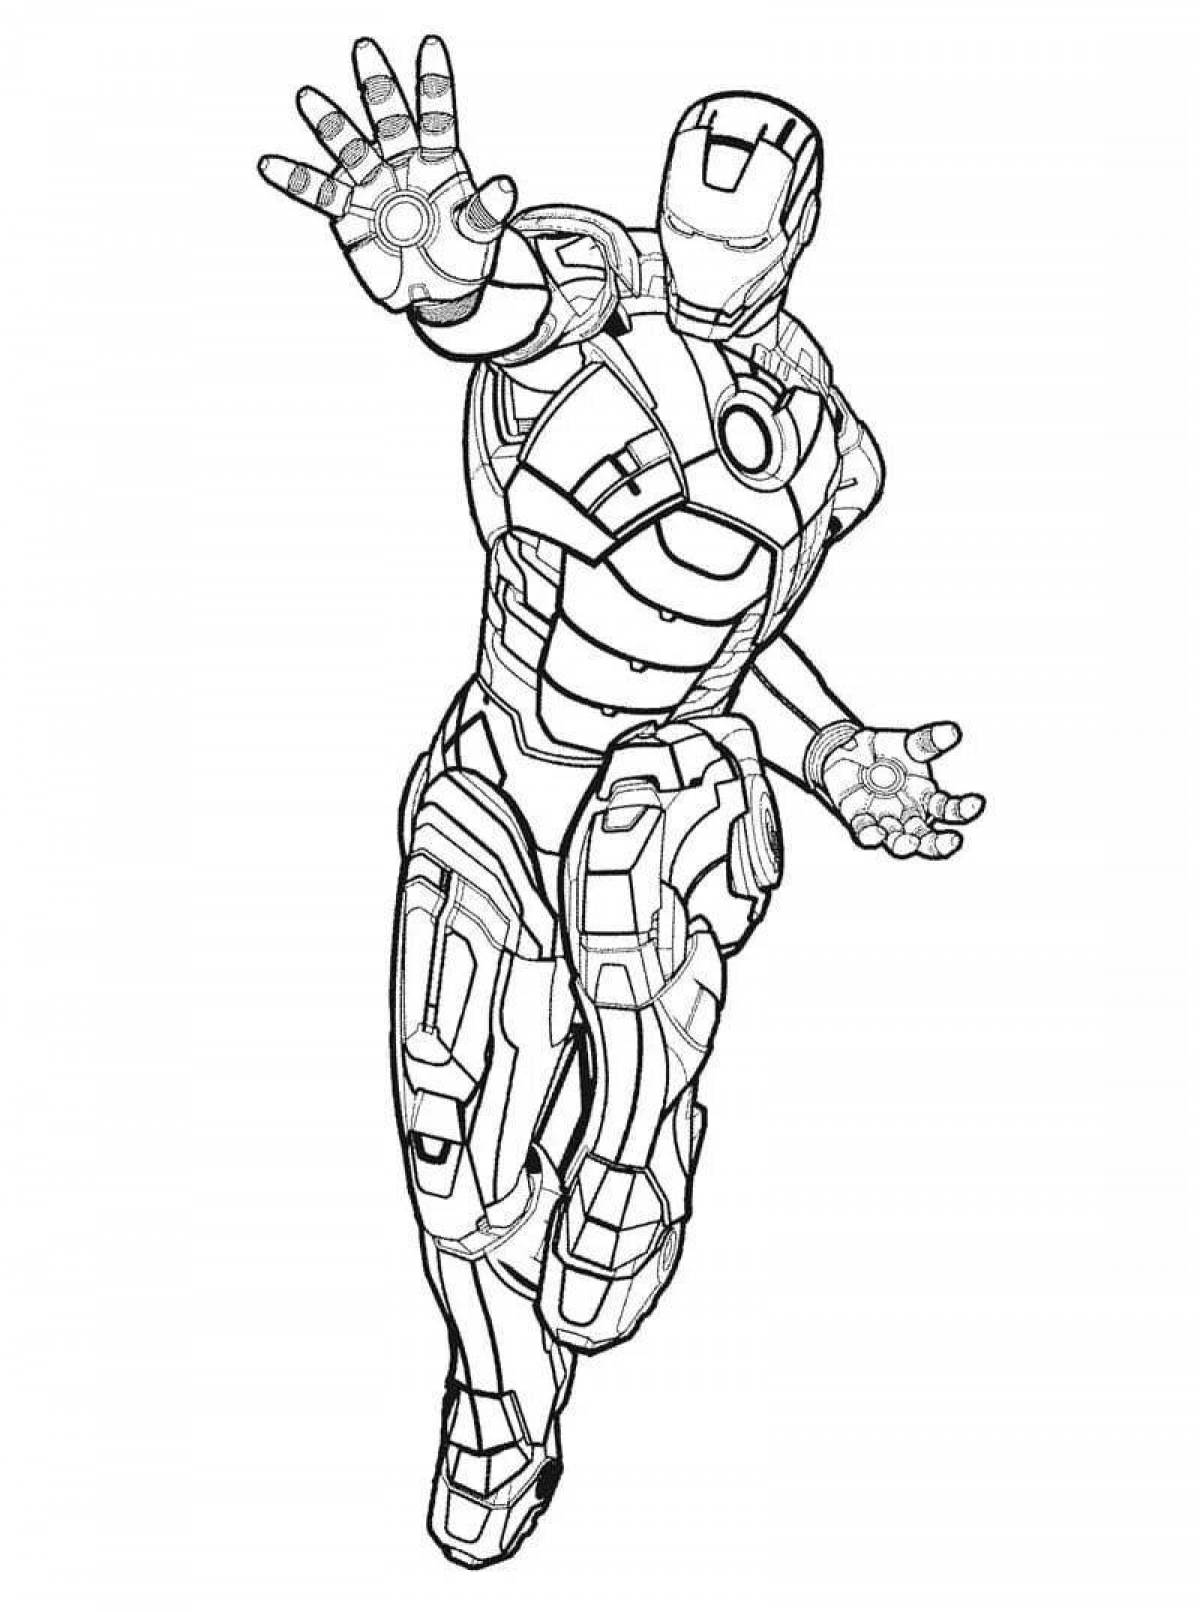 Iron Patriot coloring page in vibrant colors